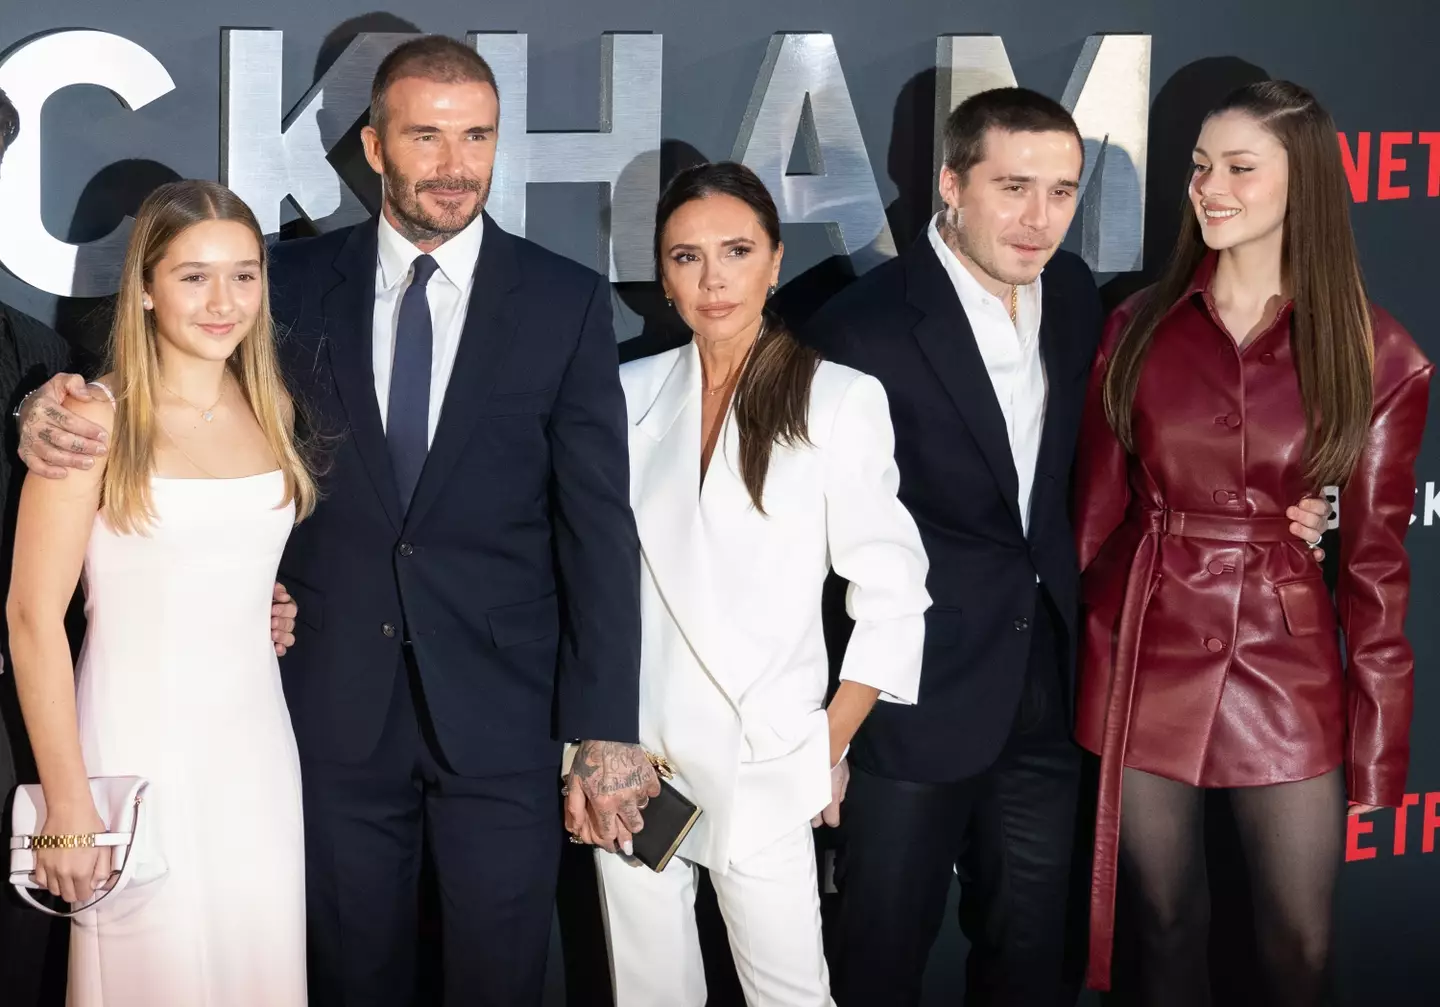 Beckham dropped on Netflix last week and has proven to be a huge success.